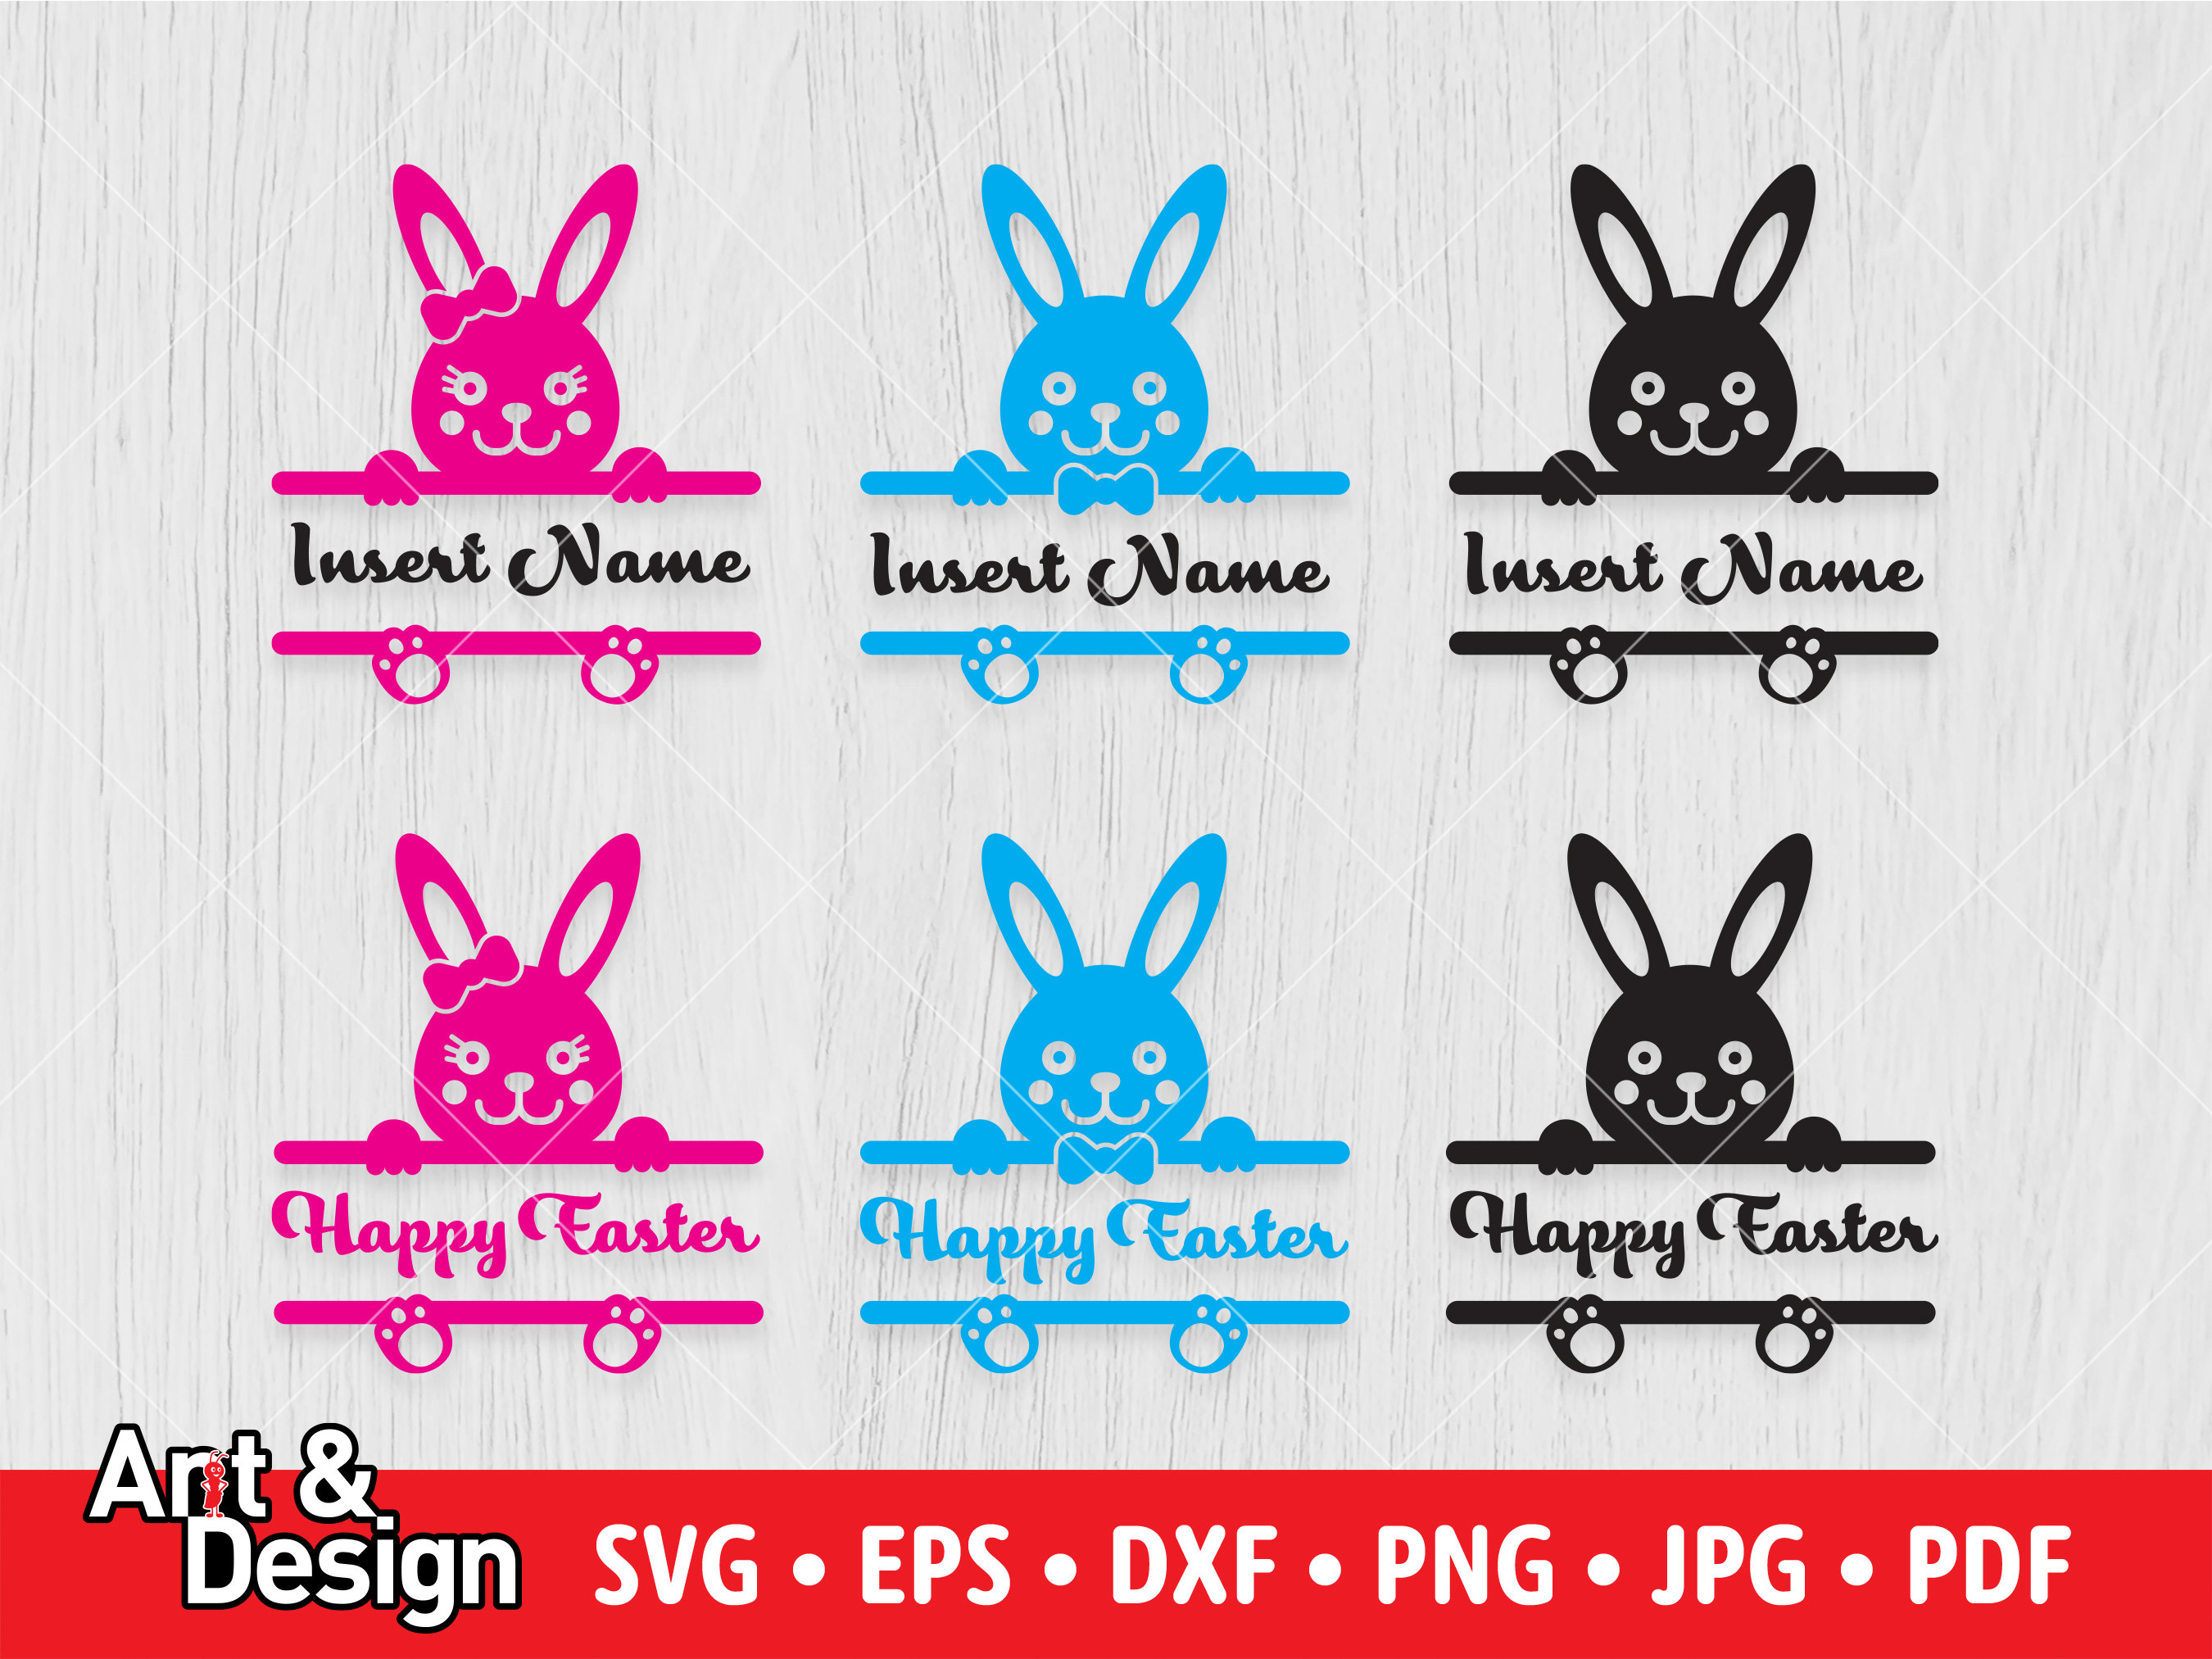 Happy Easter Bunny SVG Insert Name Bunny Your Name Monogram | Etsy